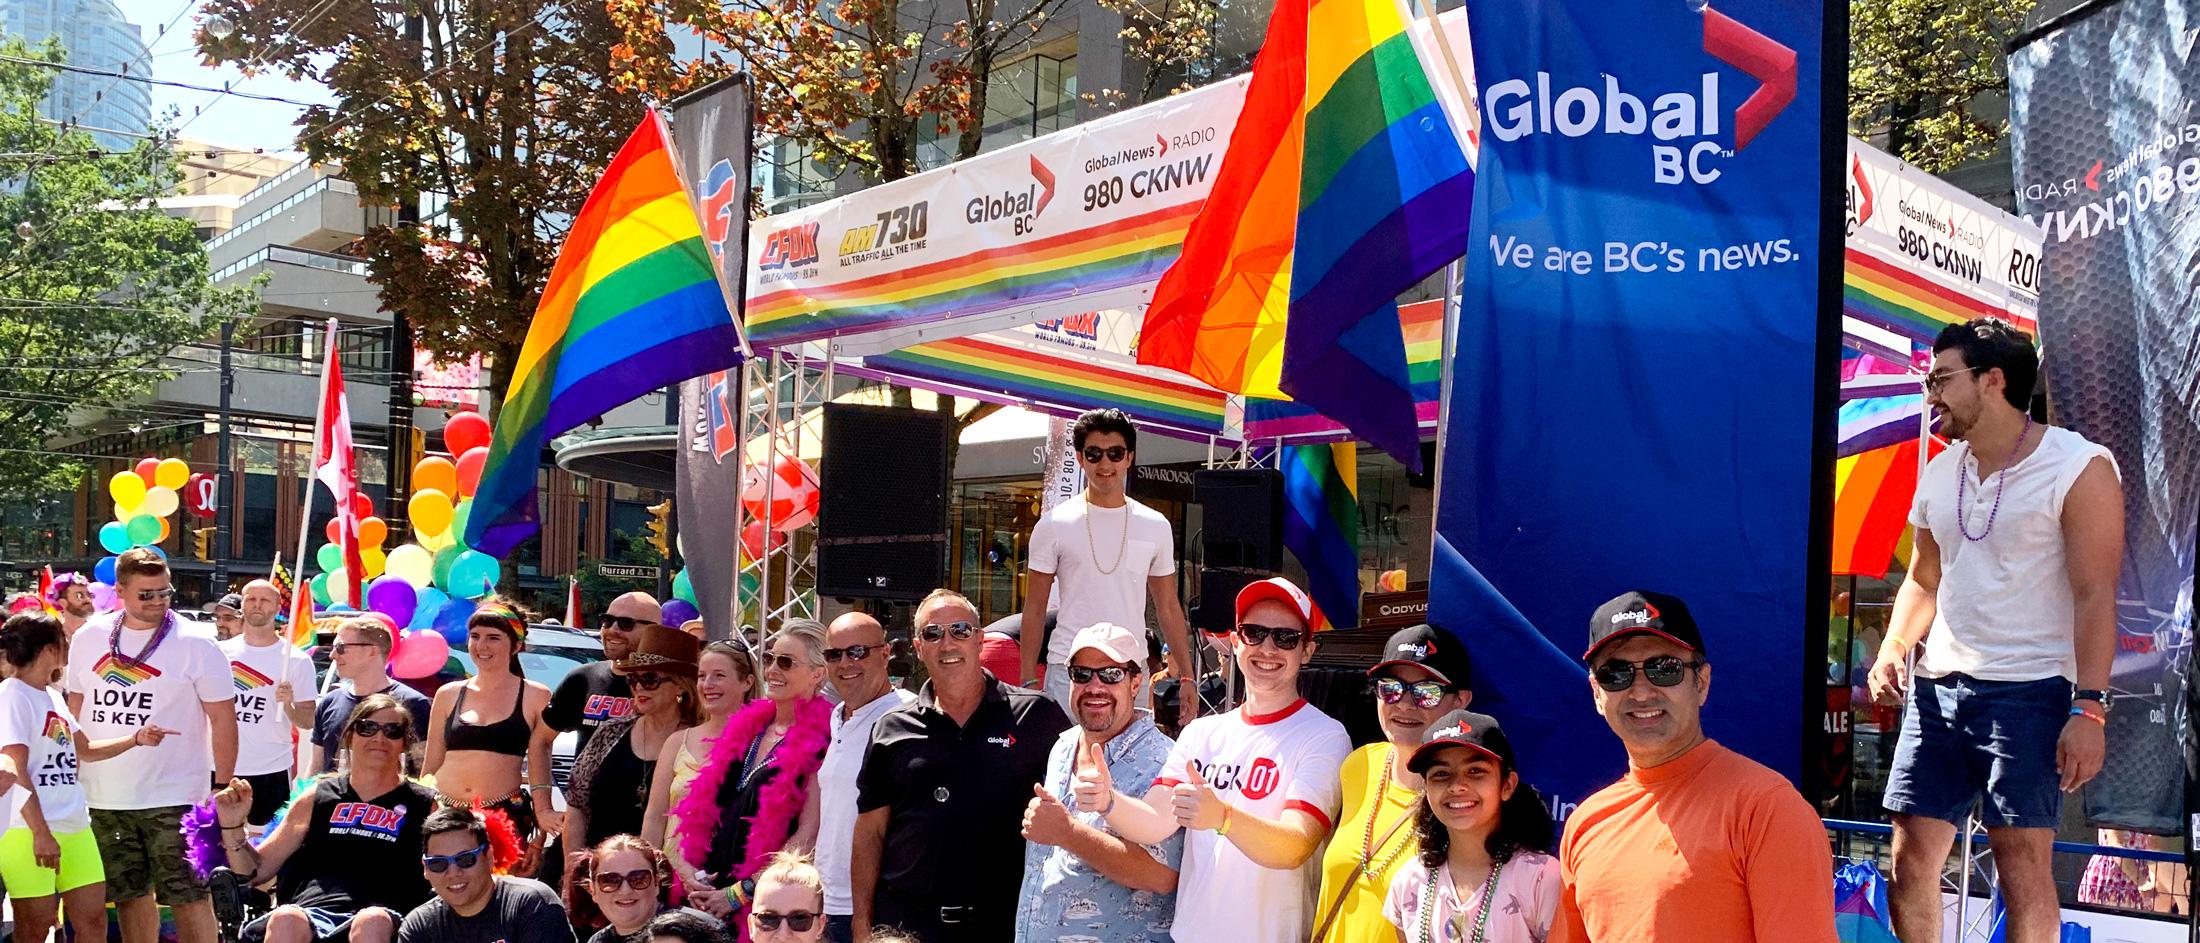 A Global BC event at a Pride parade in Vancouver, British Columbia.